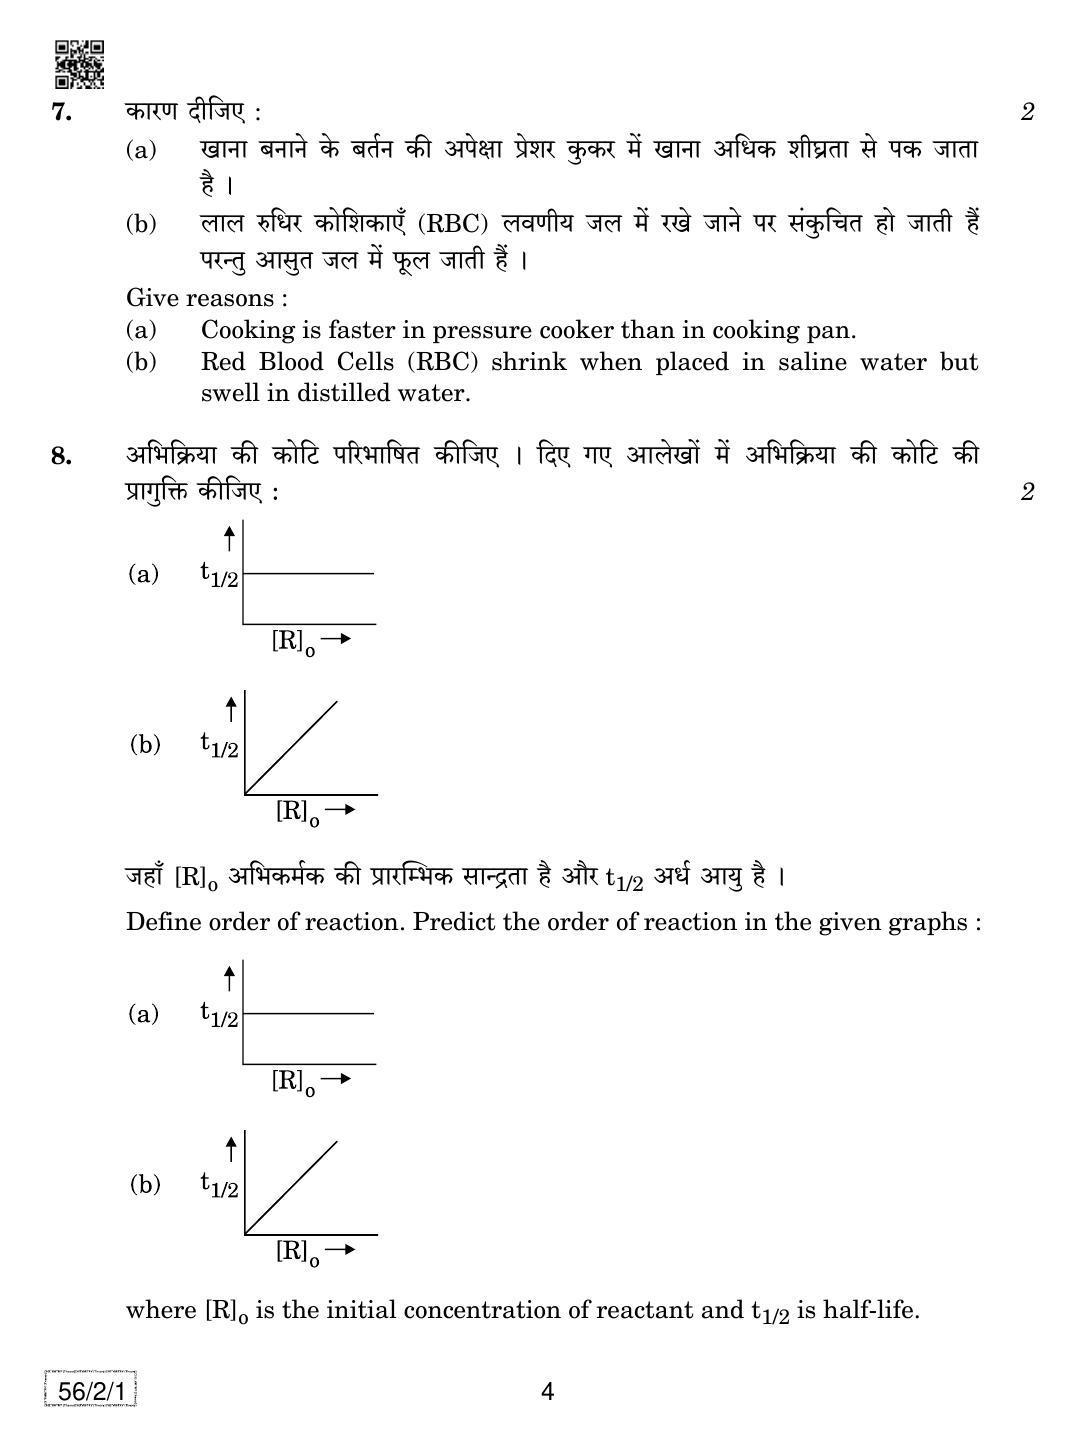 CBSE Class 12 56-2-1 Chemistry 2019 Question Paper - Page 4